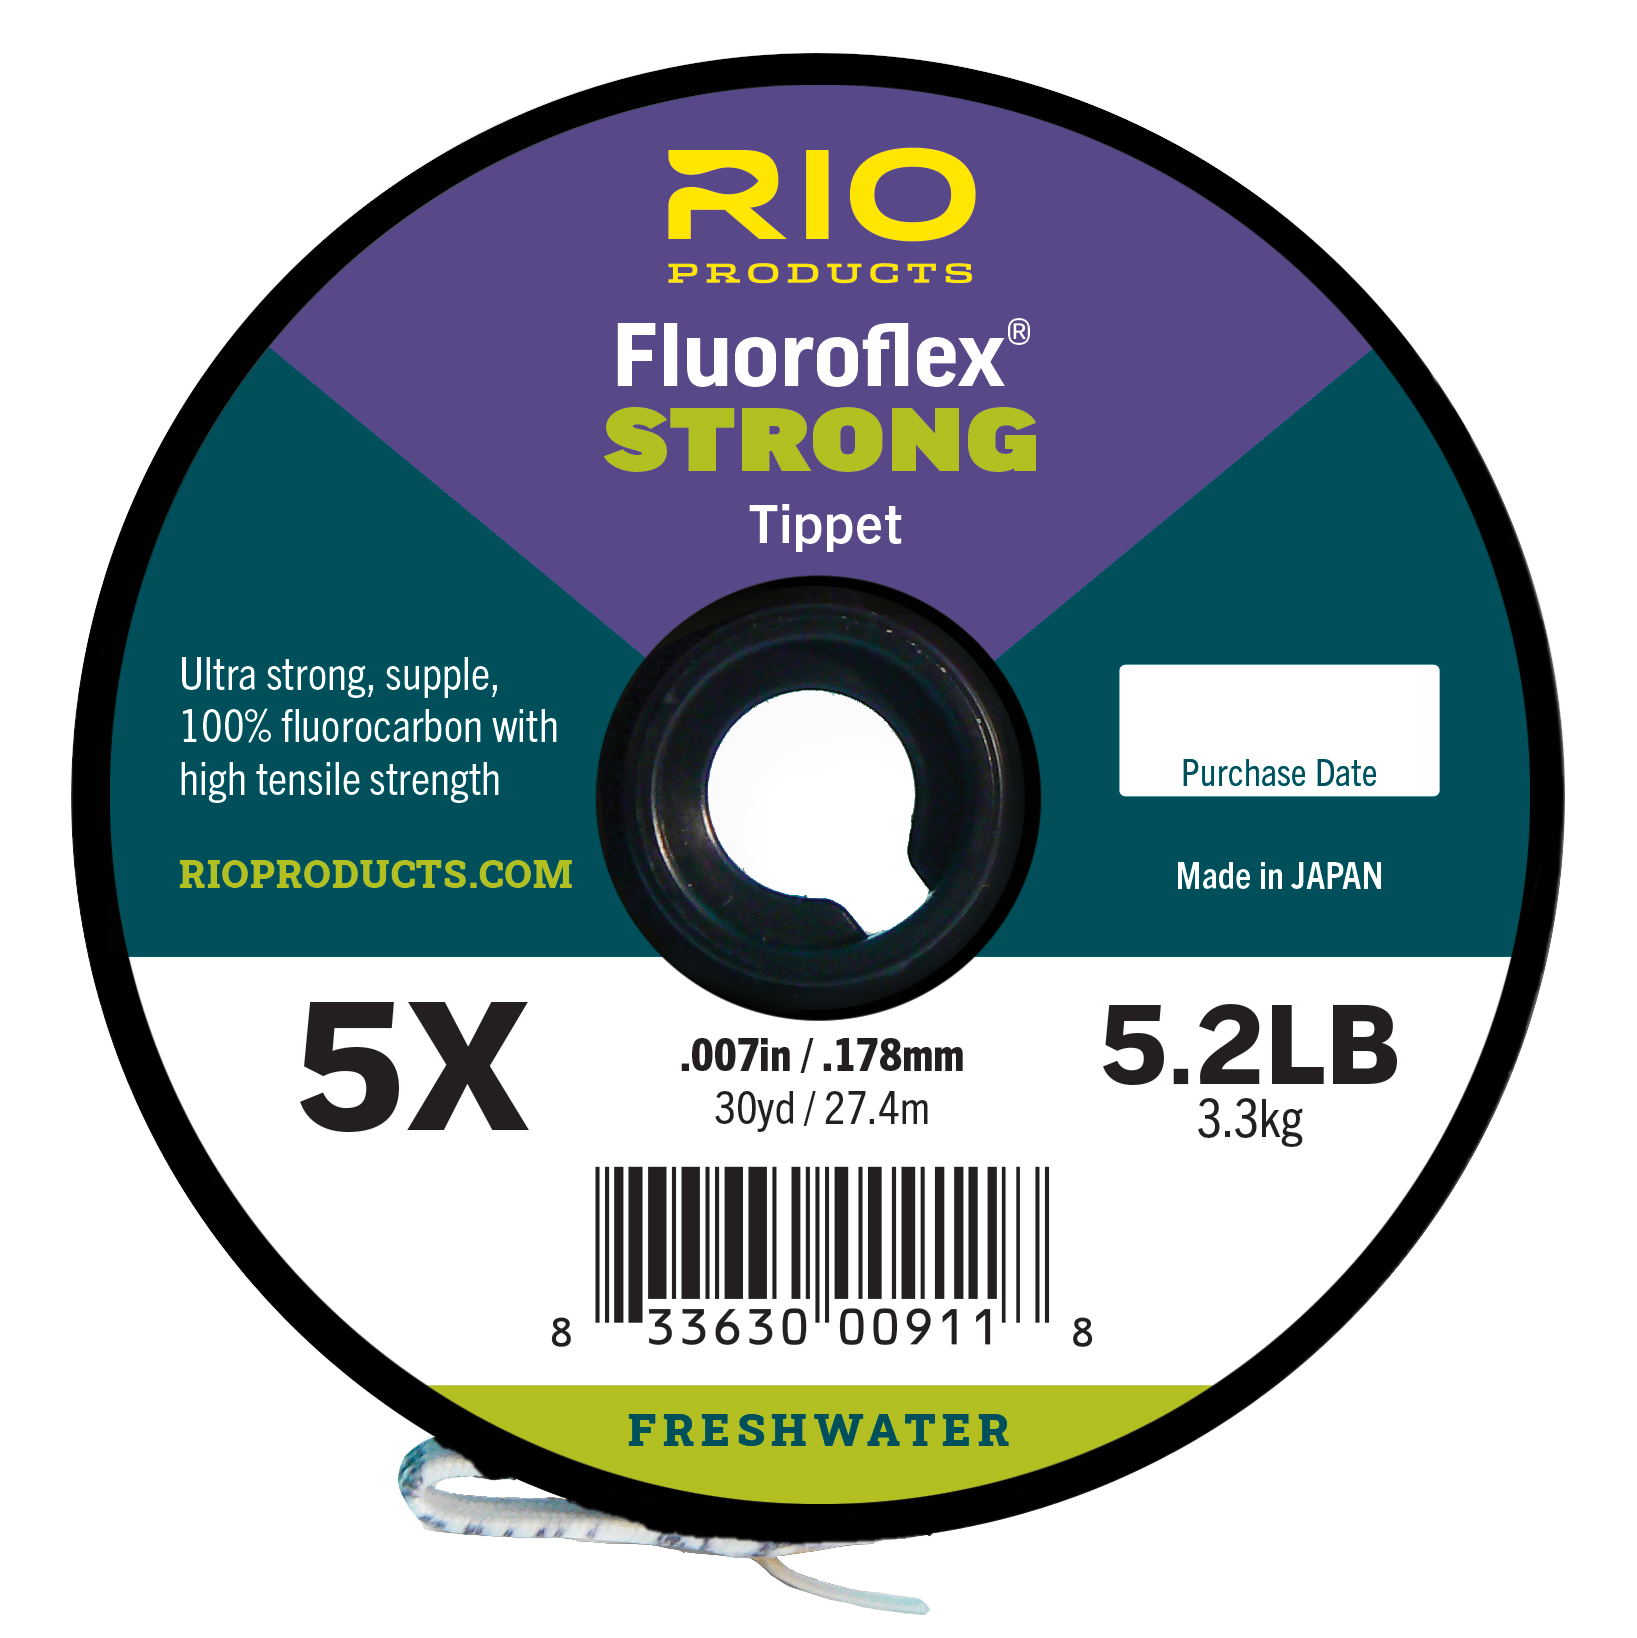 ONE 100YD SPOOL OF RIO FLUOROFLEX STRONG TIPPET 6X 3.8 LB 100% FLUOROCARBON